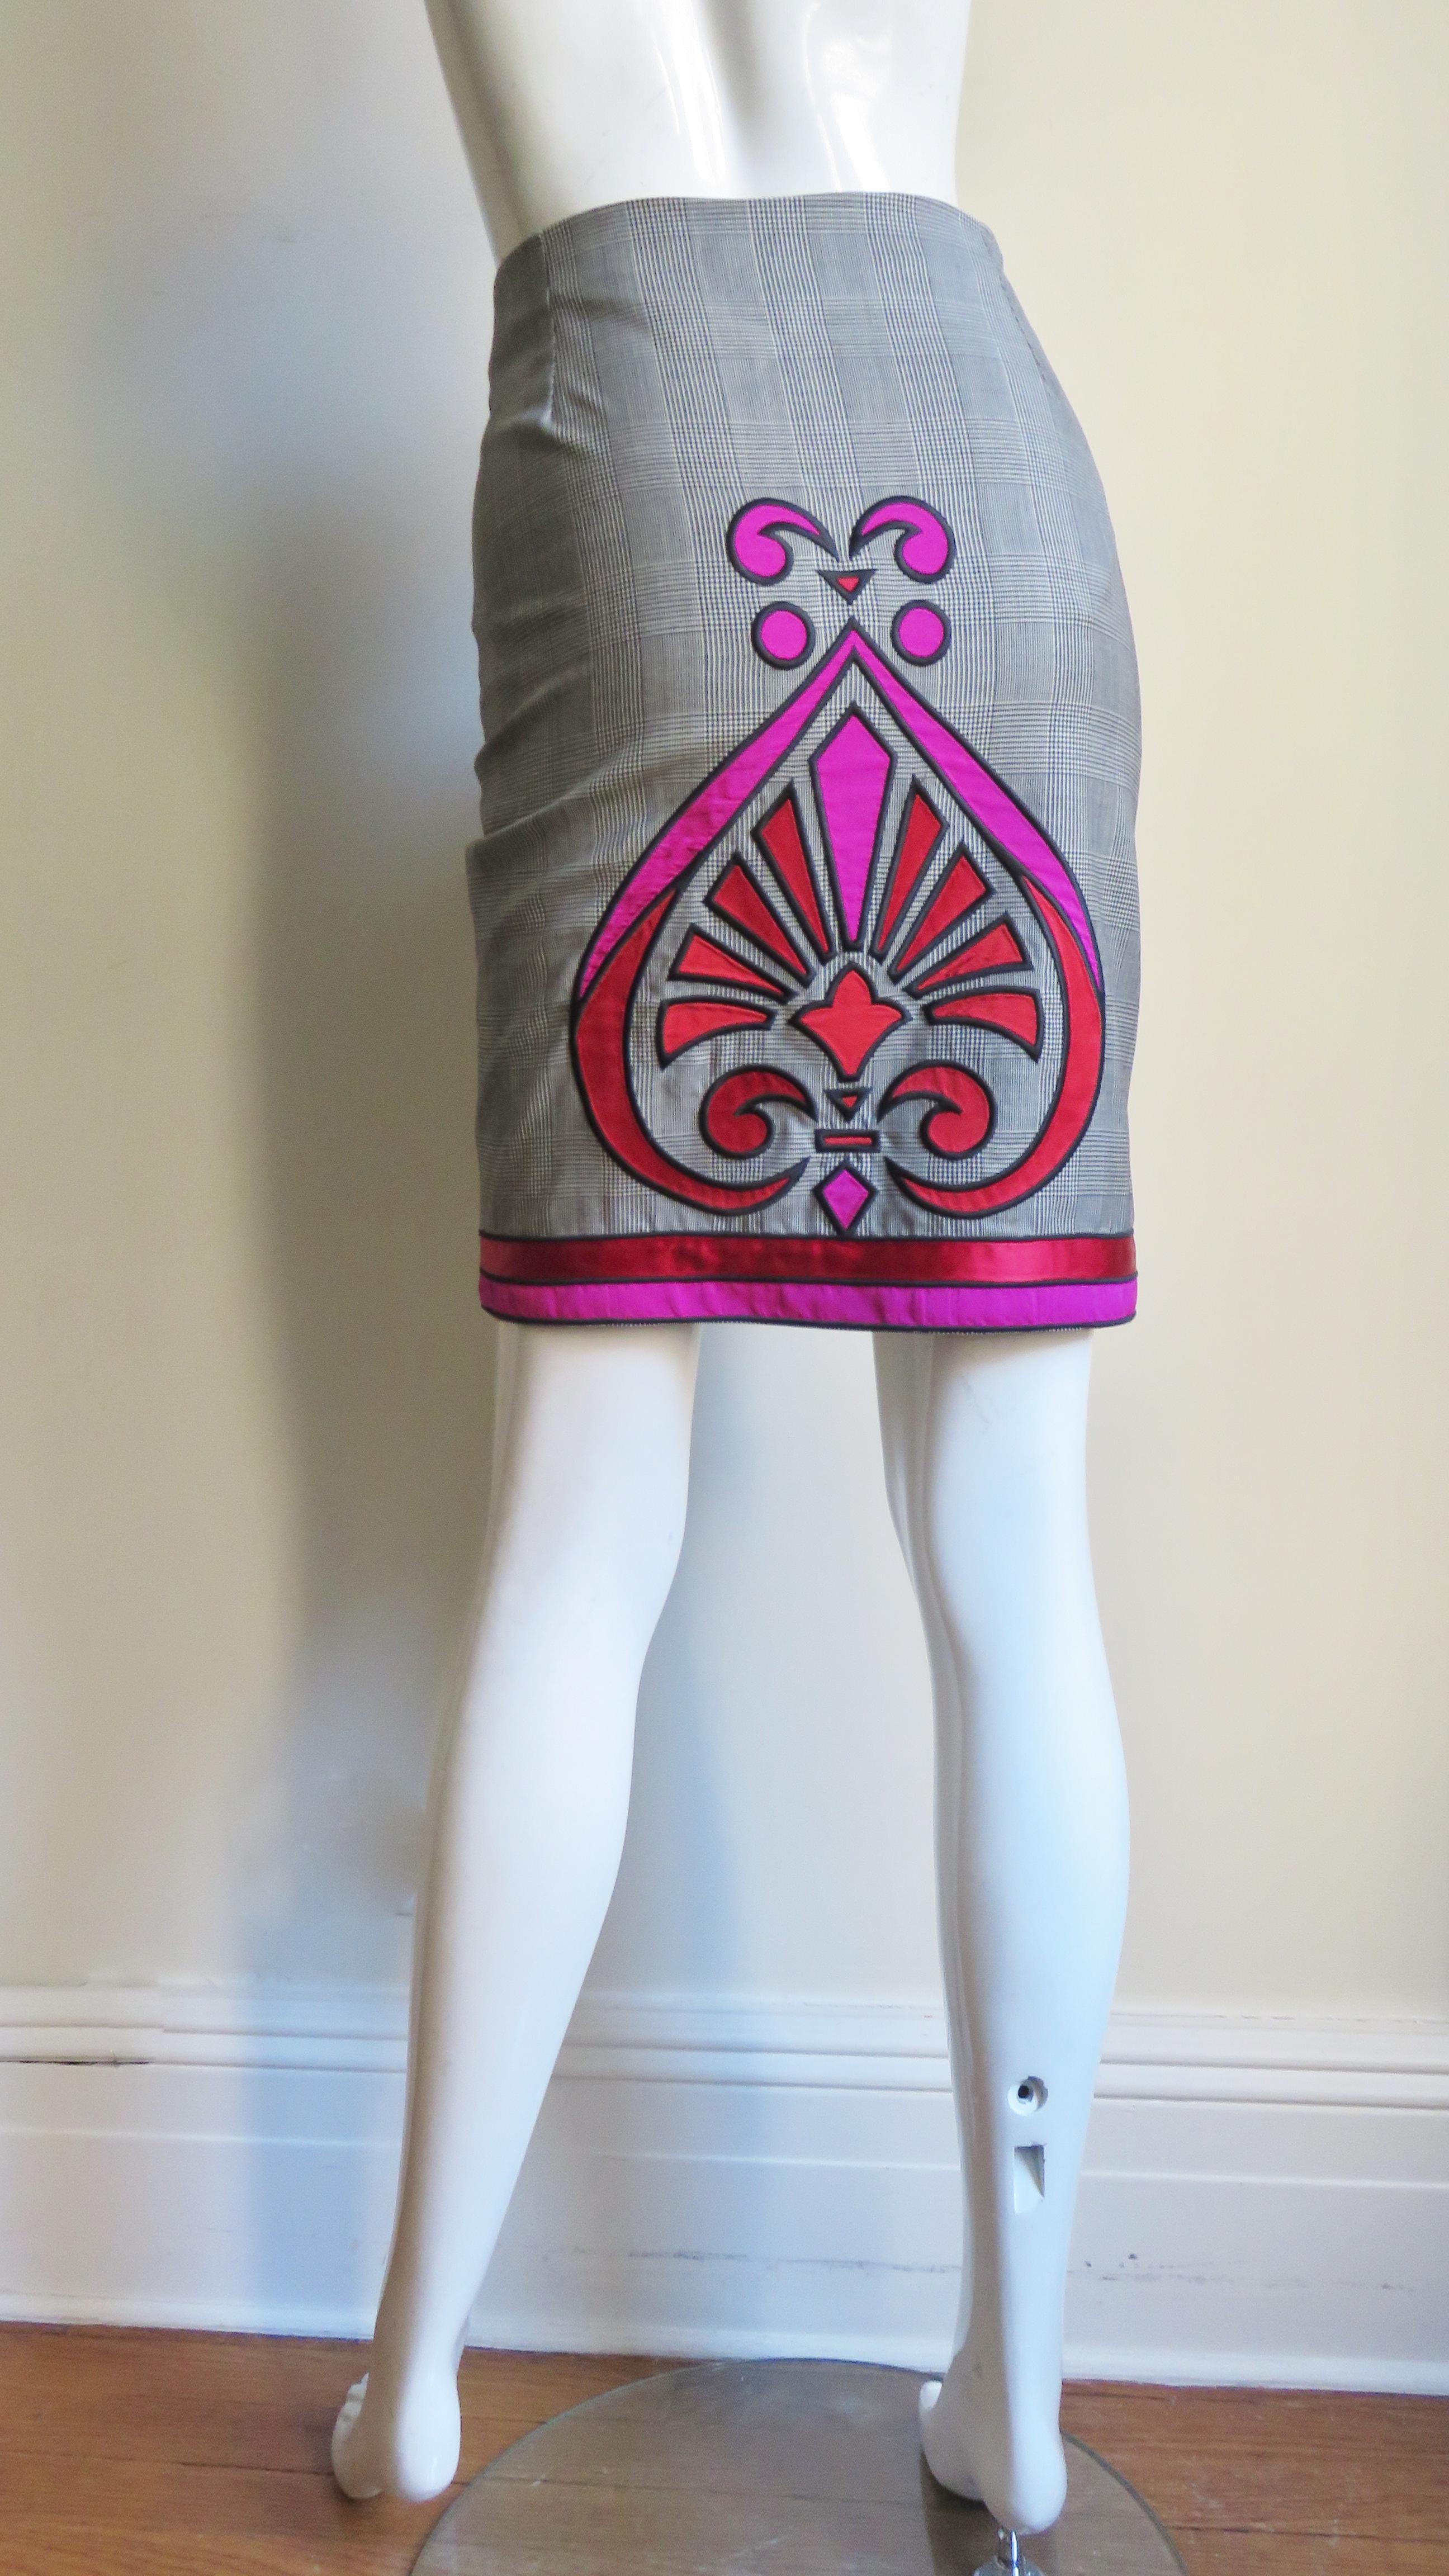 Gianni Versace Applique 2 Sided Skirt 8